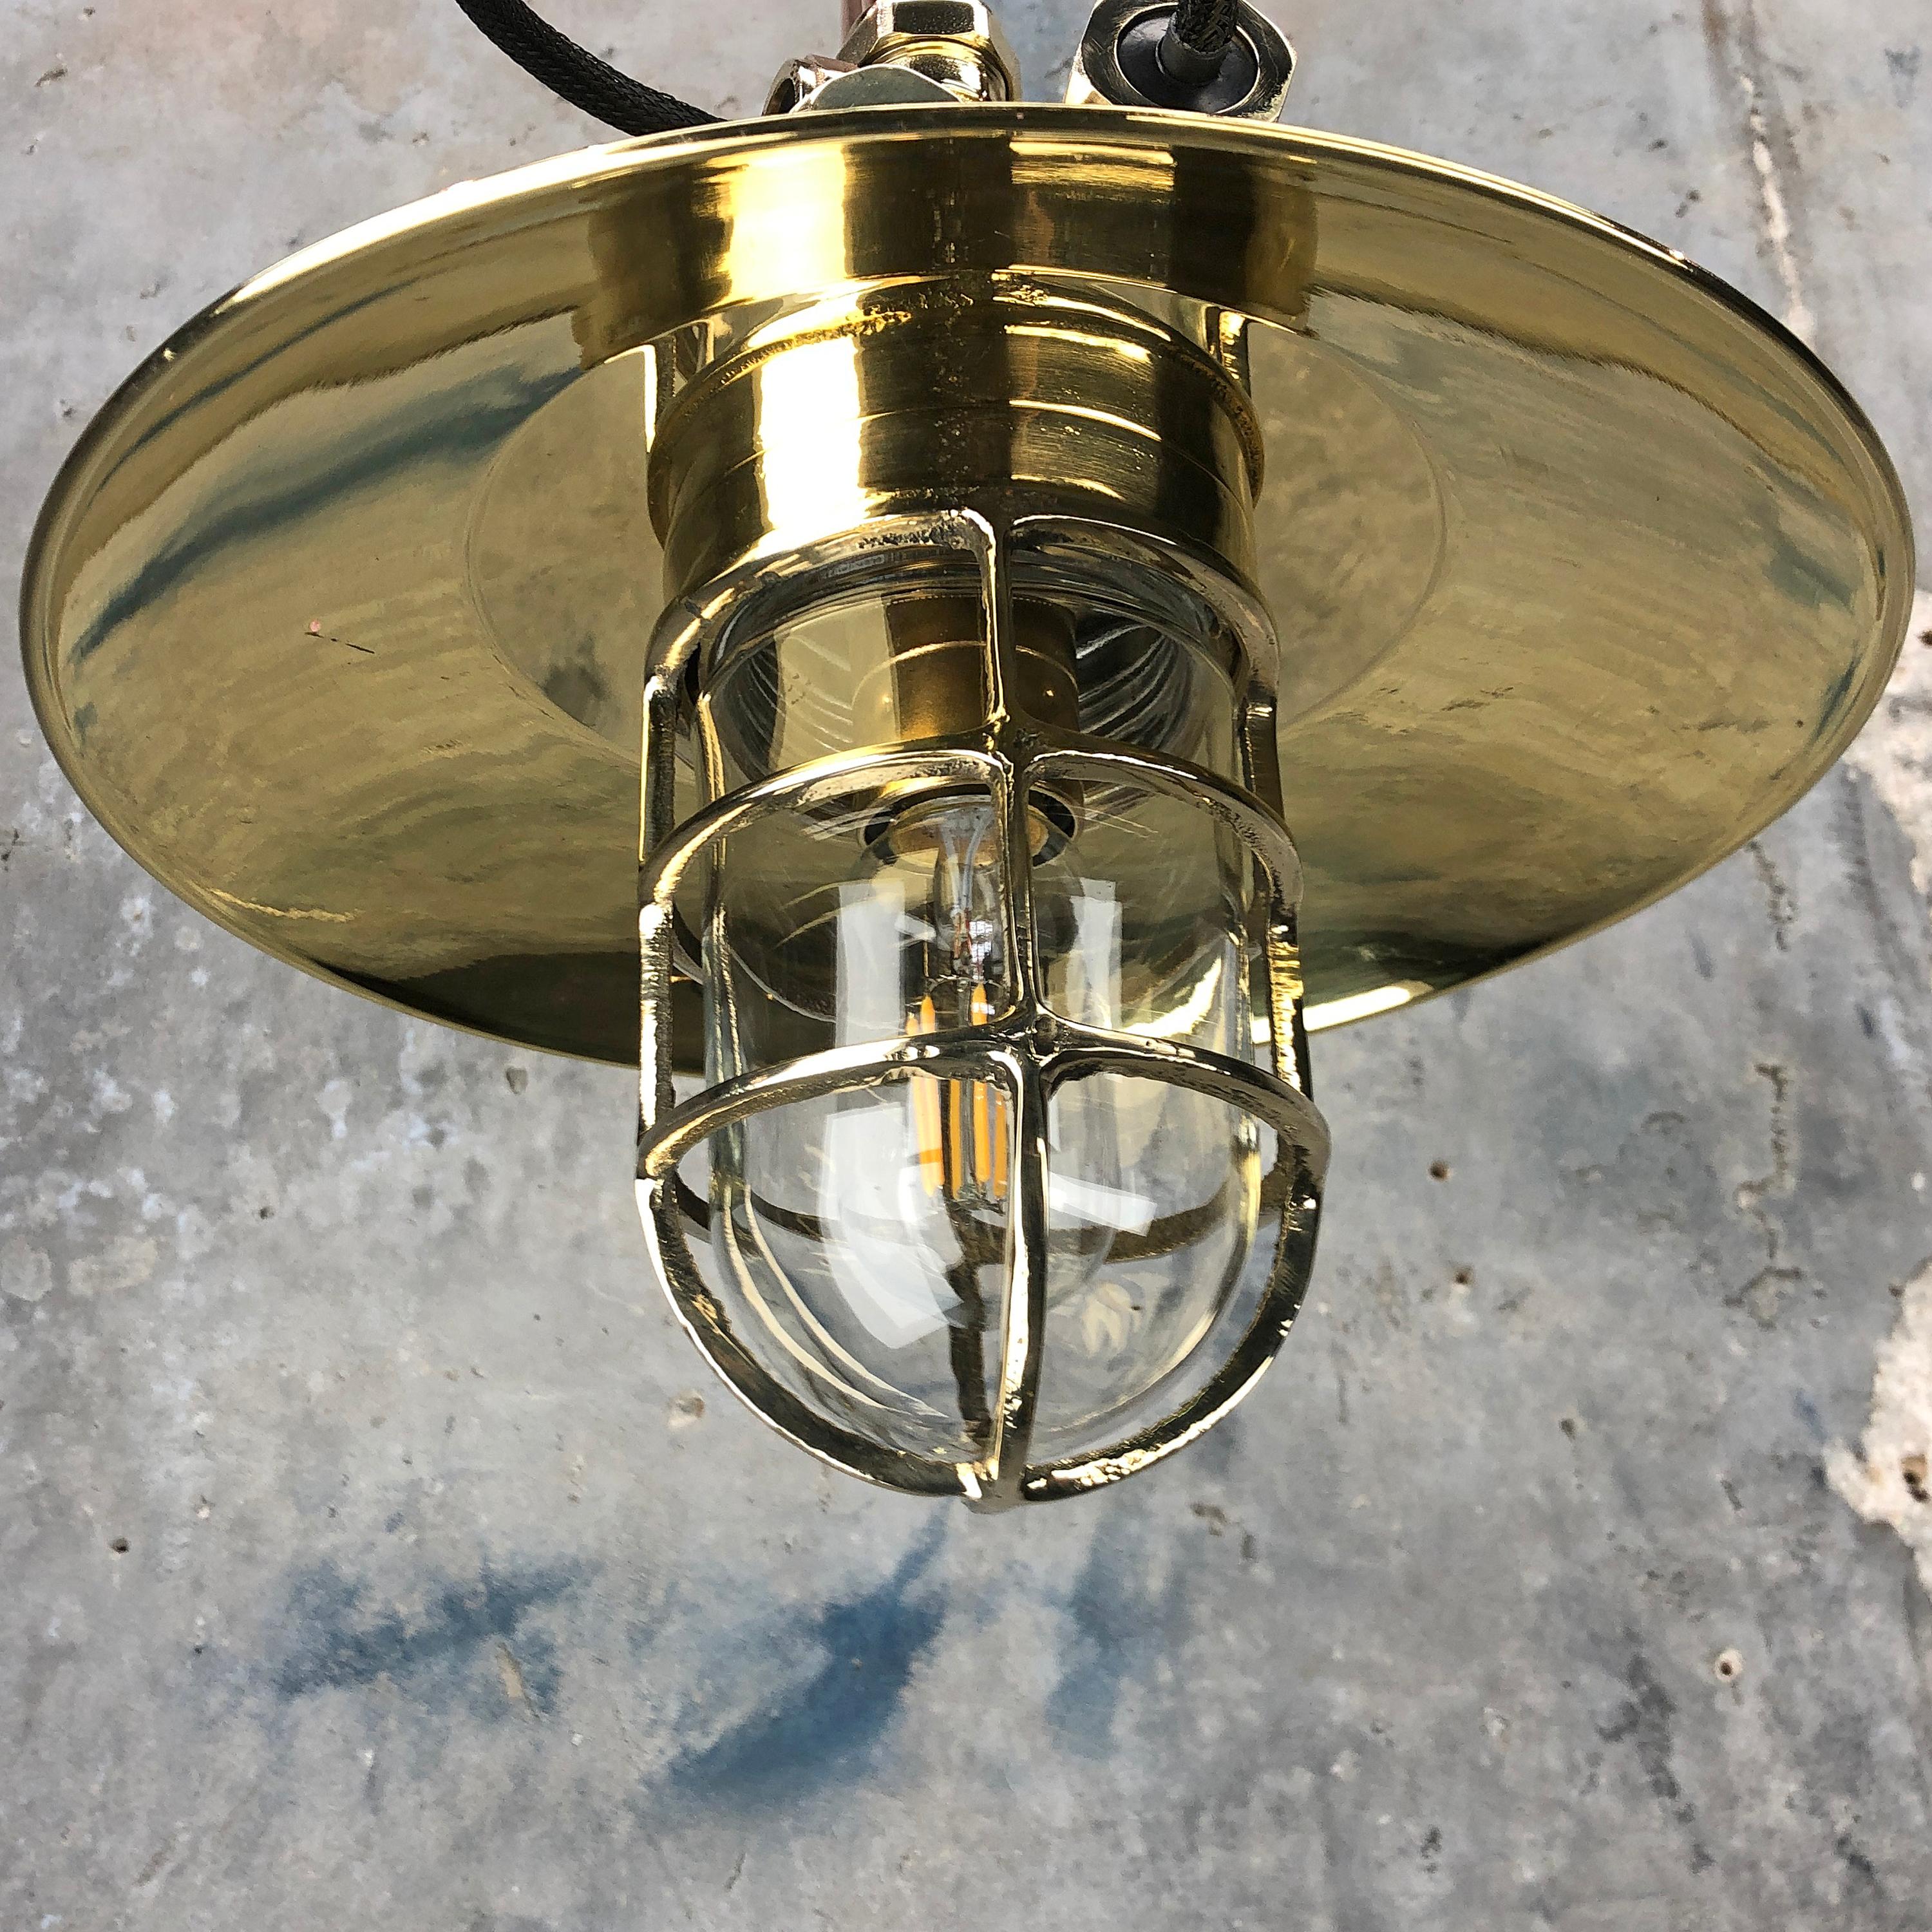 1970s Japanese Cast Brass and Copper Explosion Proof Caged Cantilever Wall Light 12